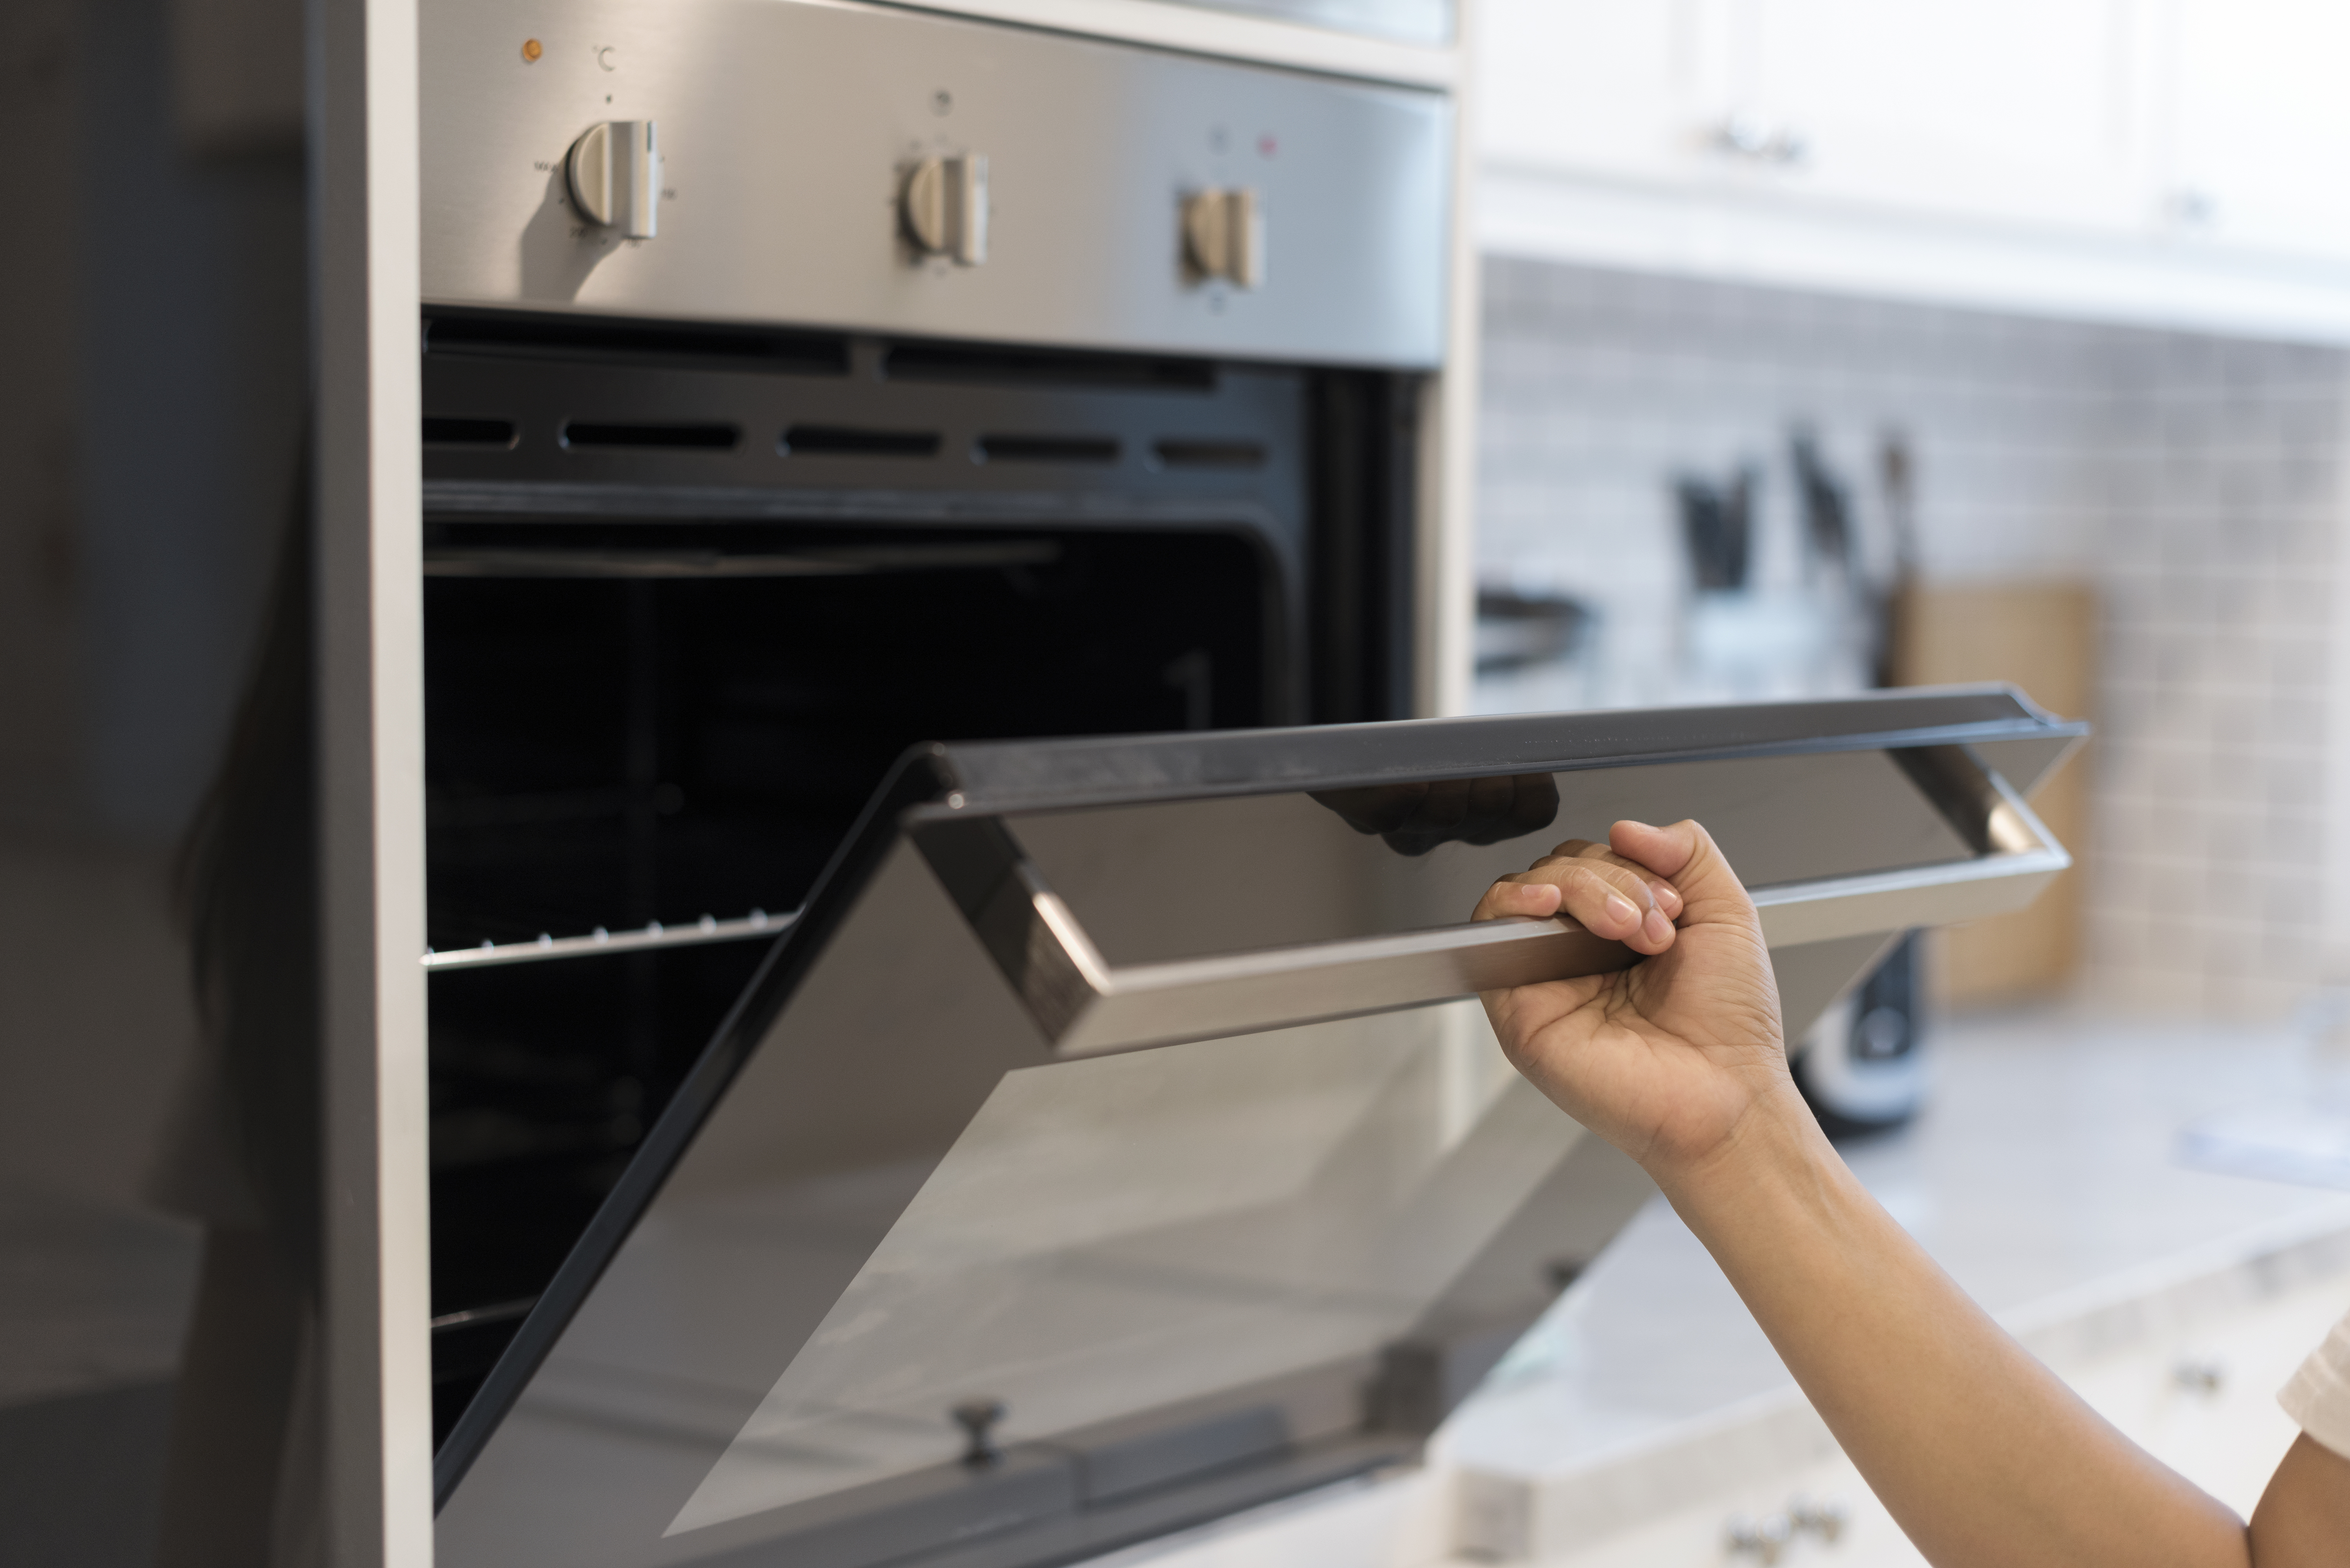 Self-Cleaning Ovens VS Steam Cleaning Ovens